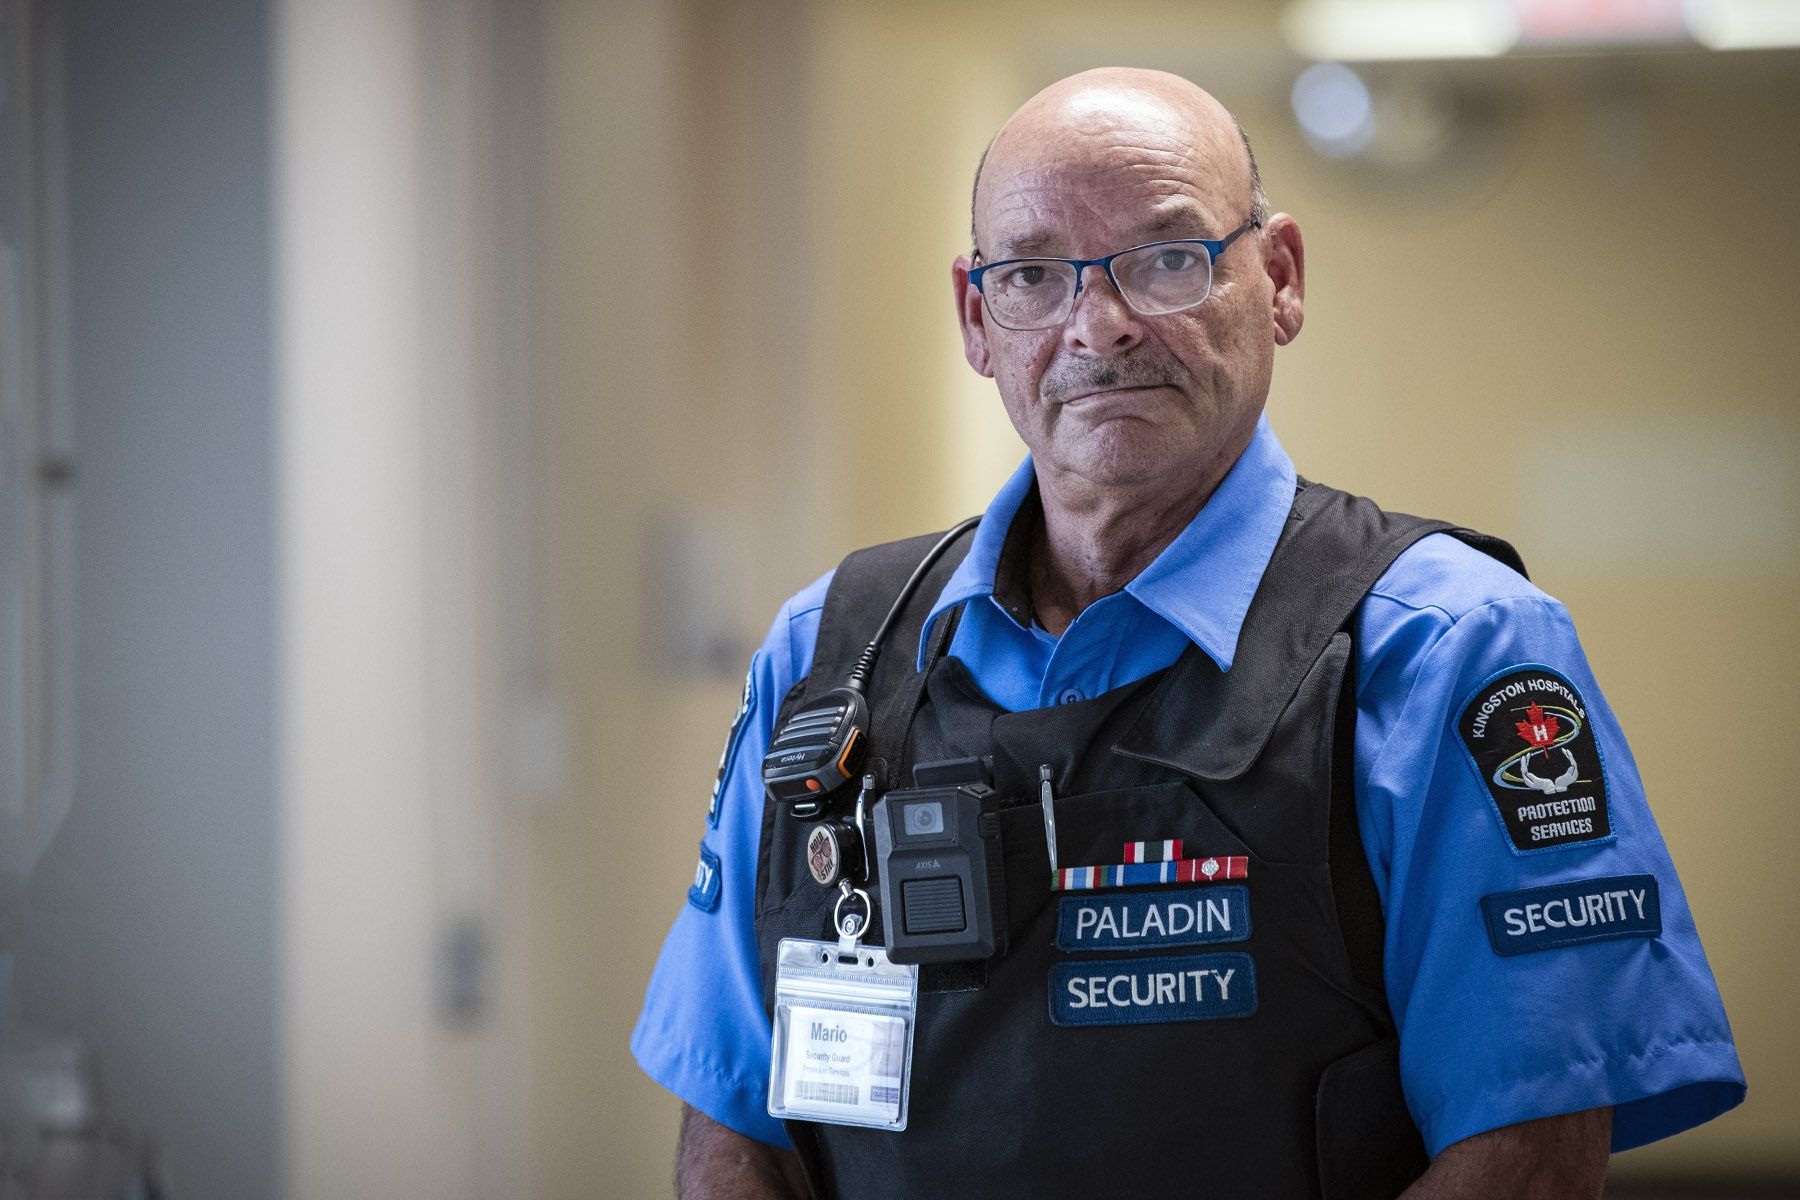 Mario Lelievre is pictured standing in a hallway at Hotel Dieu Hospital. He has brown eyes, wears blue glasses and is bald. He’s wearing his Paladin Security uniform, which includes a blue collared, button down shirt, protective vest, radio, and ID badge.